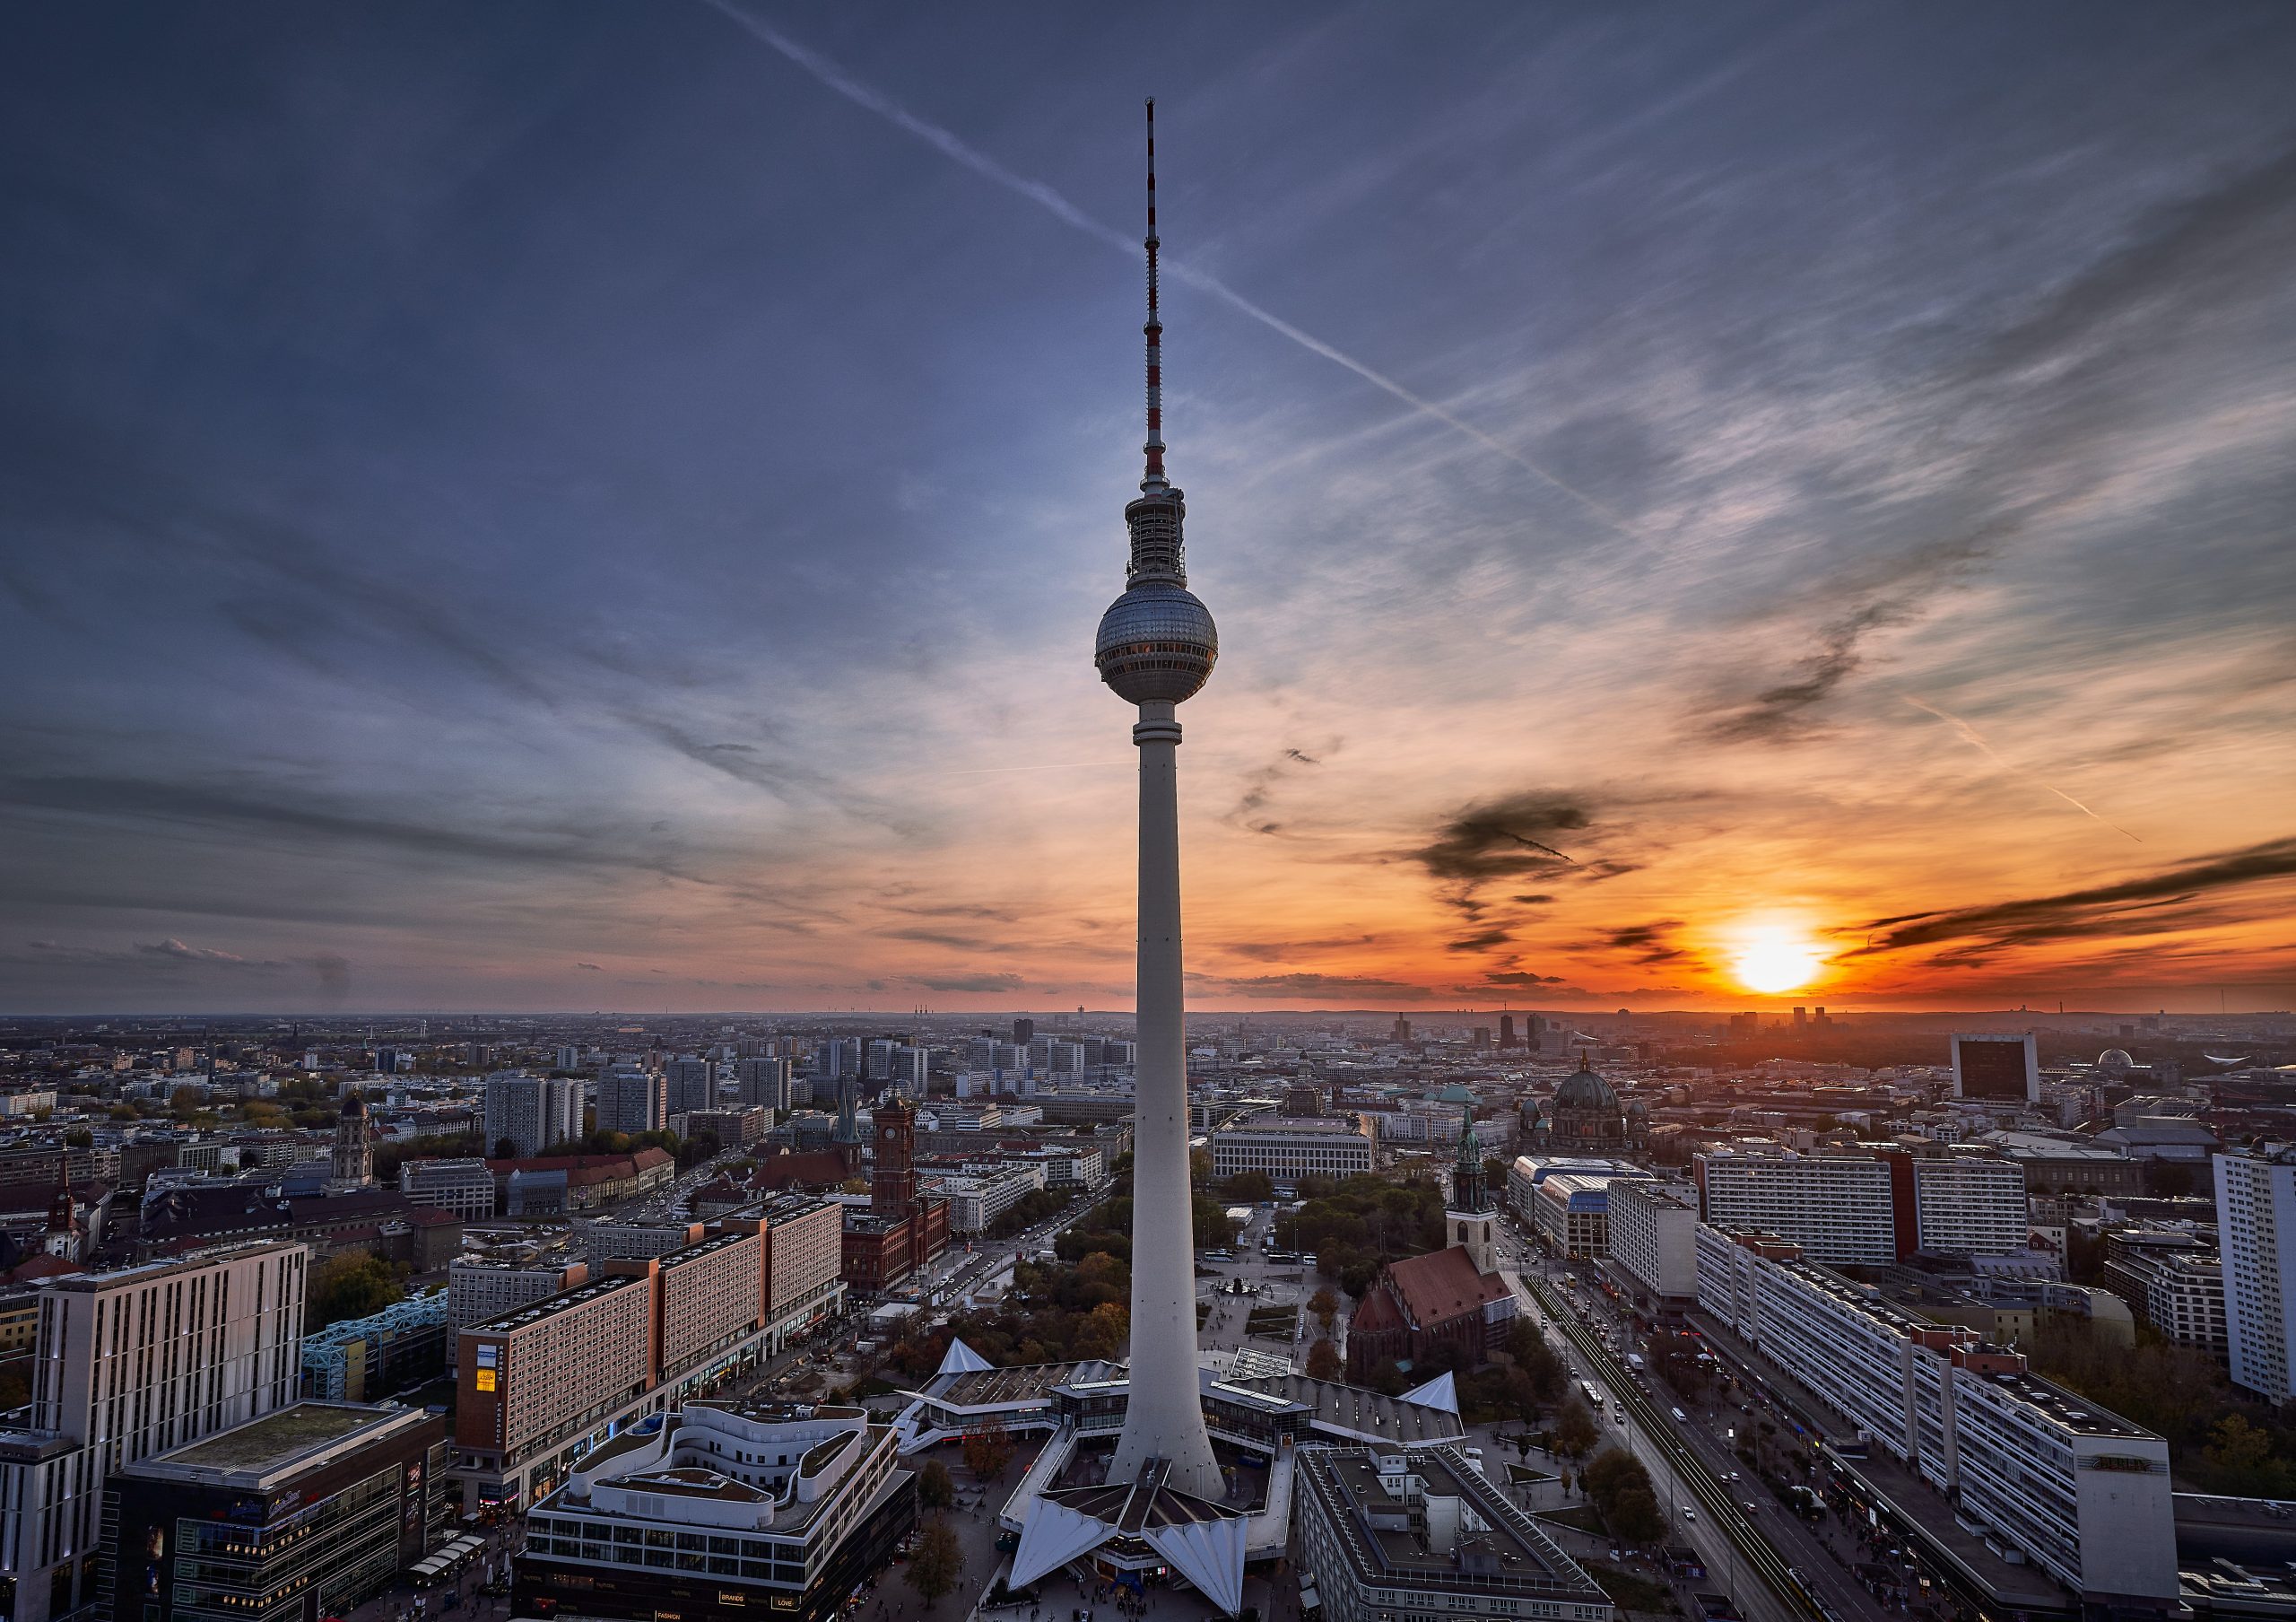 Germany’s Highest Building – The Berlin TV Tower